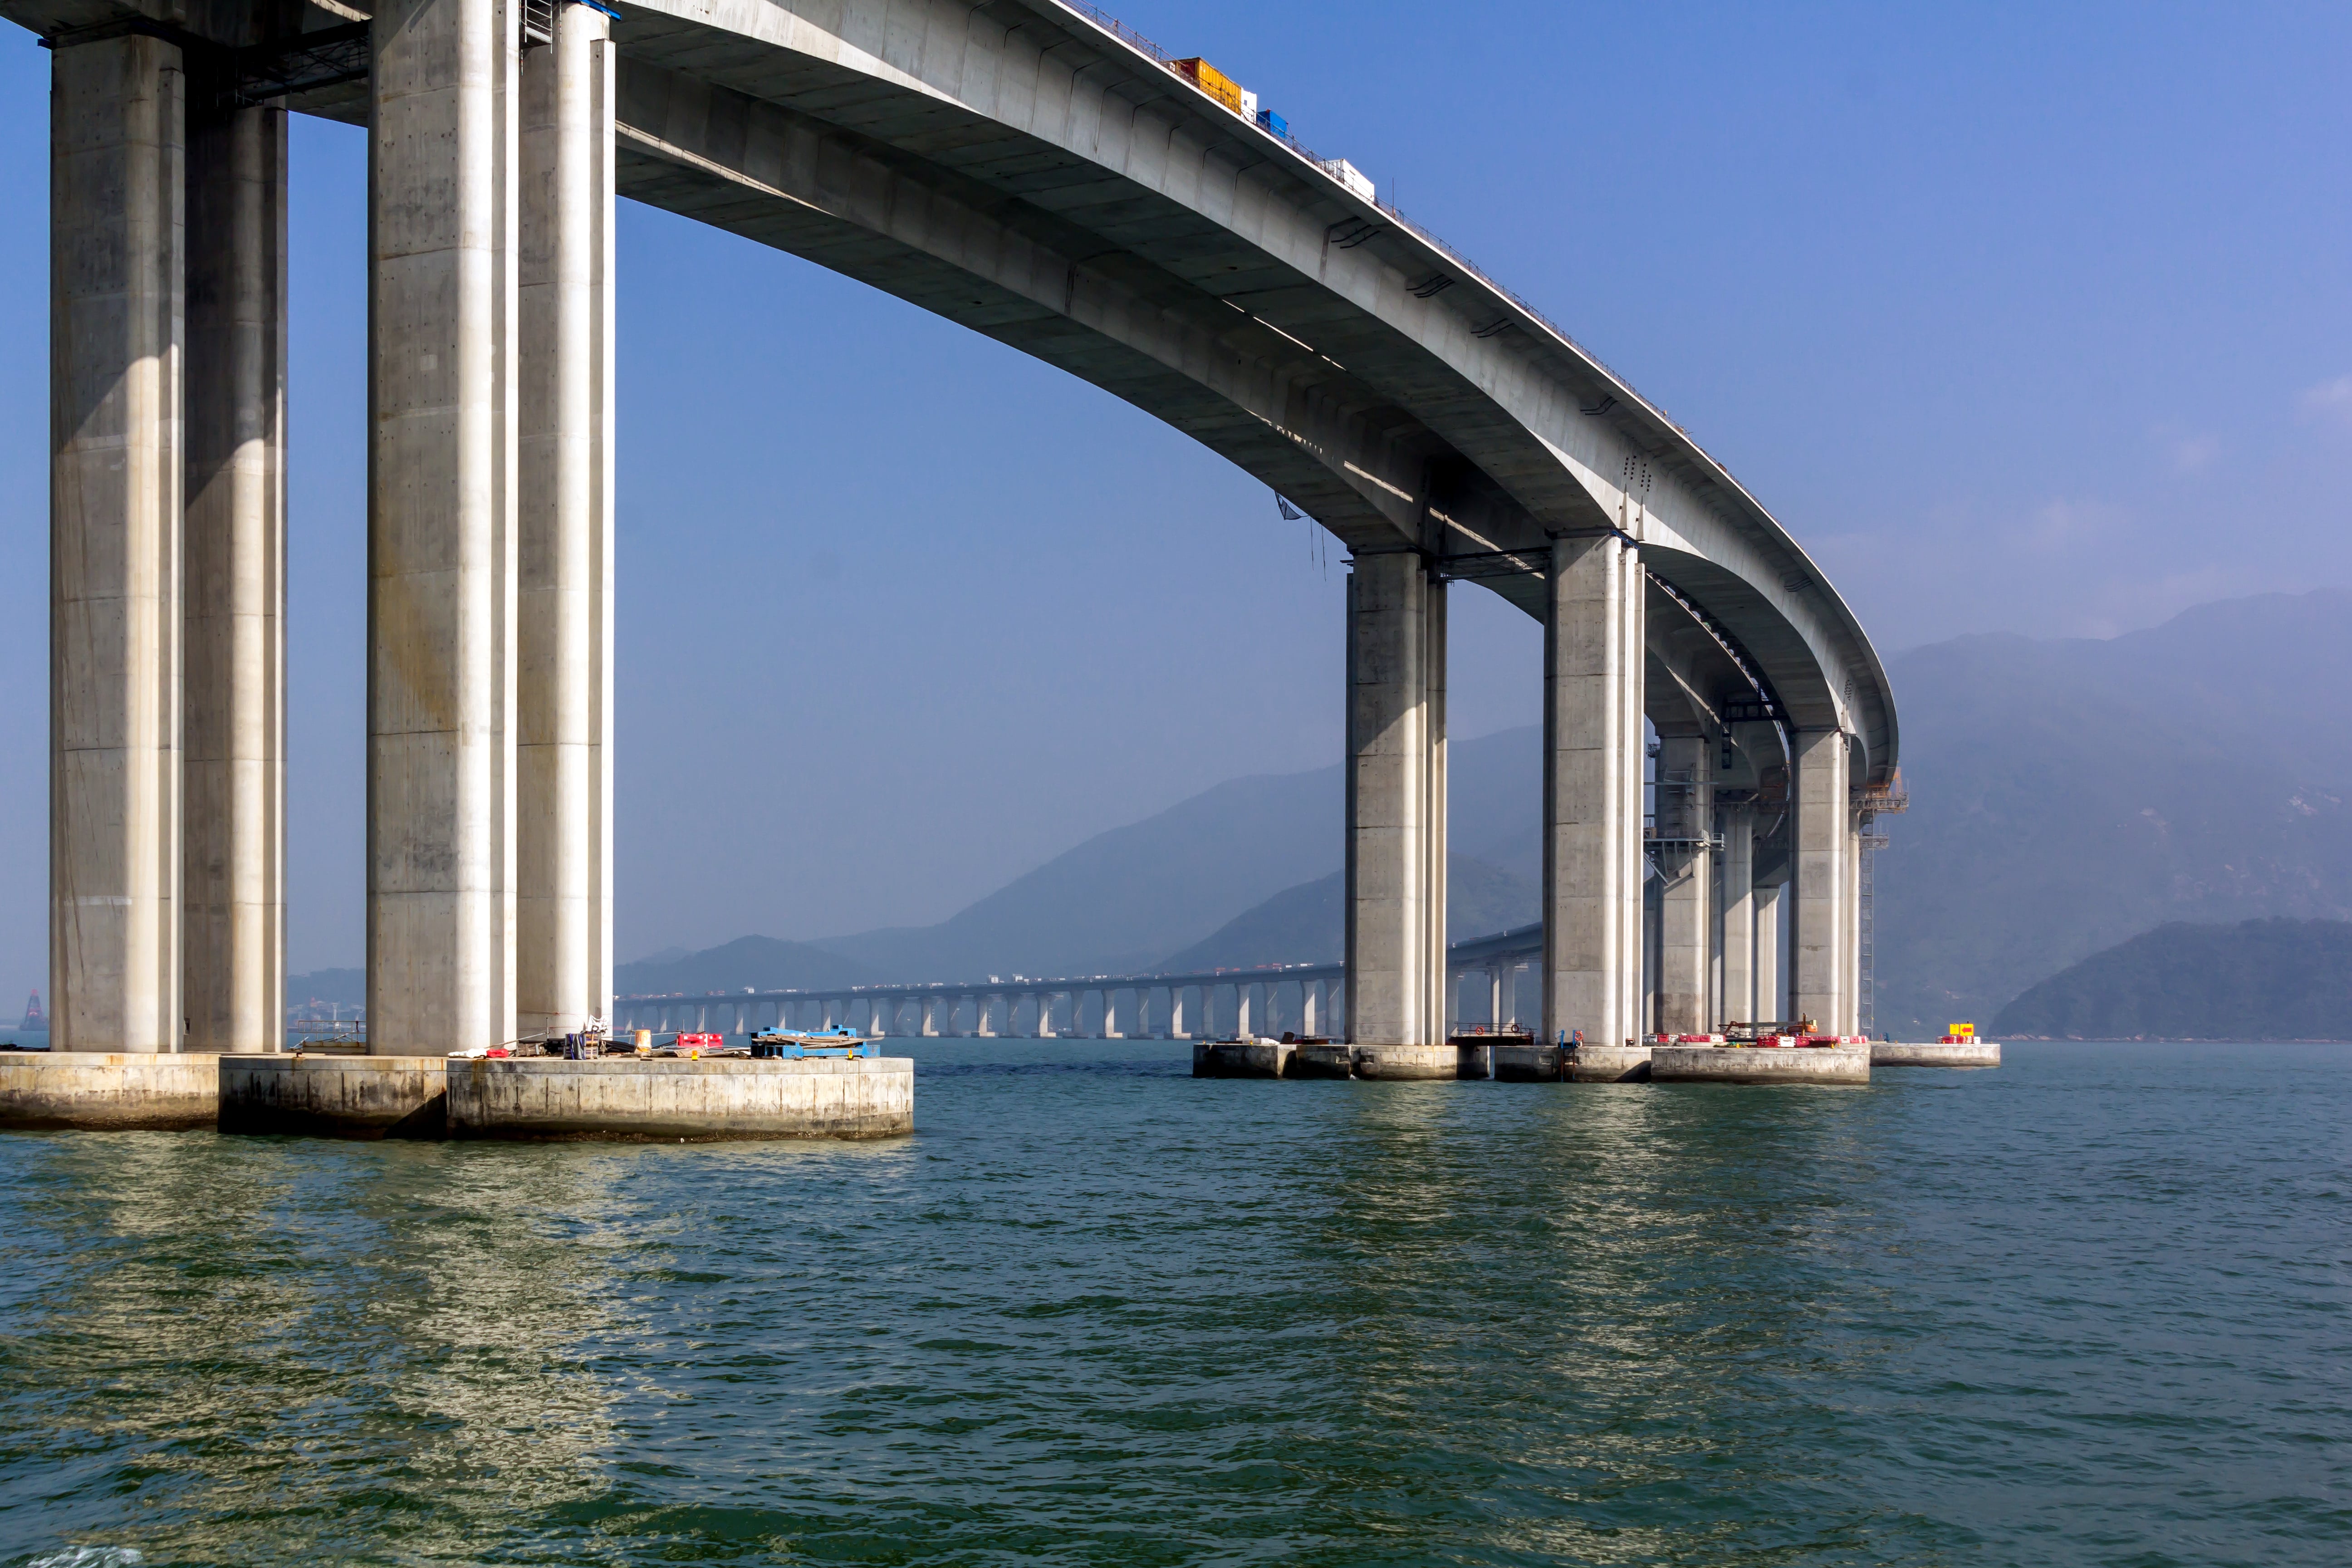 Hong Kong-Zhuhai-Macao Bridge with security solutions from Bosch